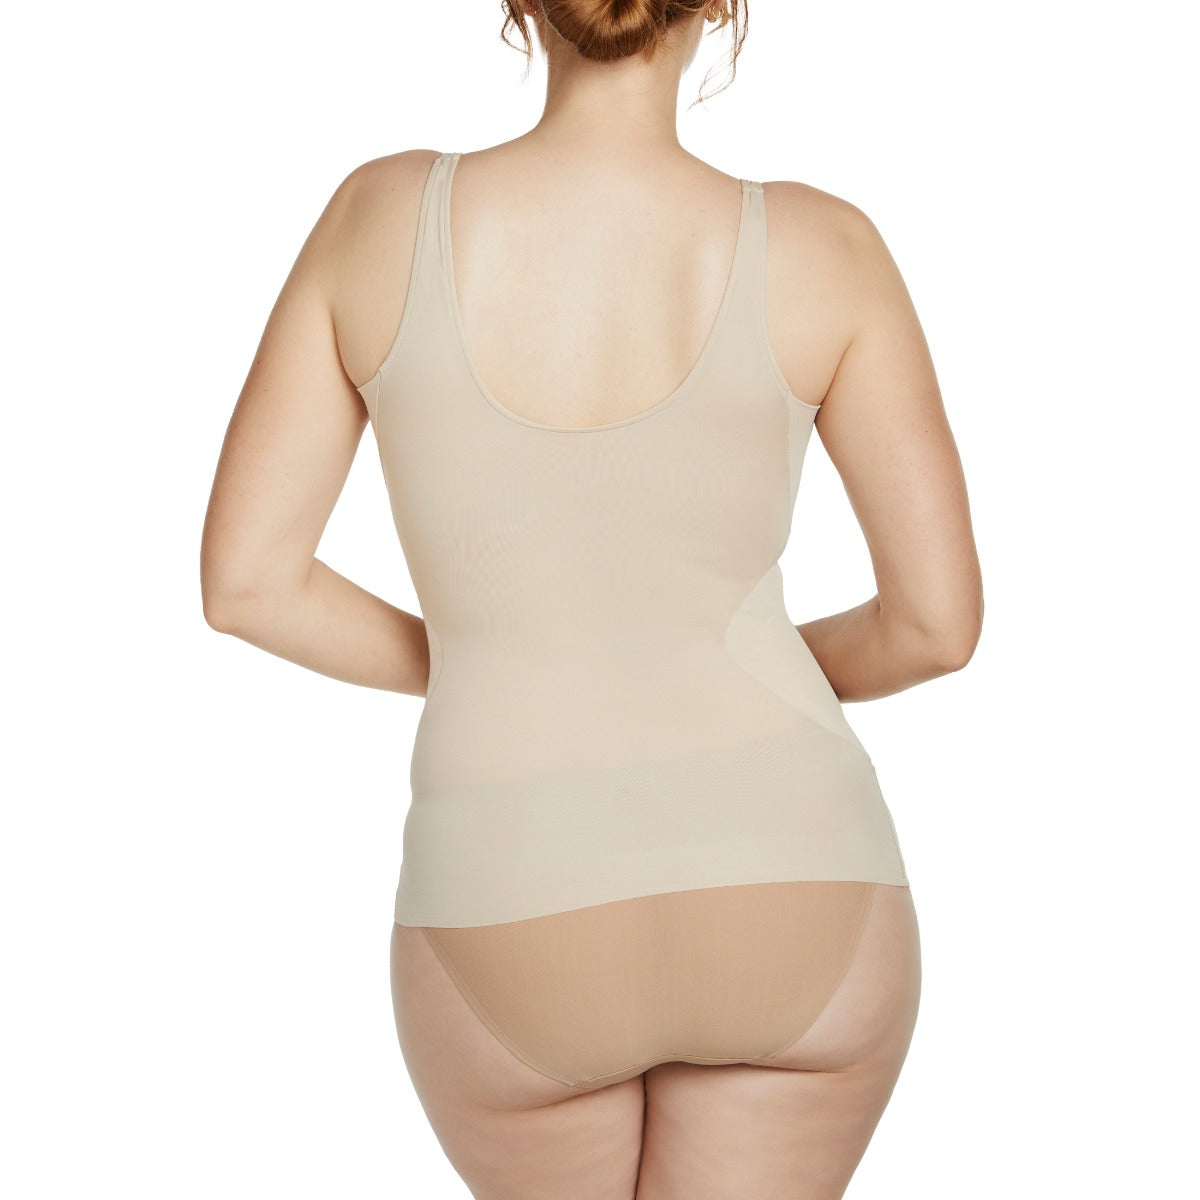 No “Side-Show” Waist Shaping Camisole